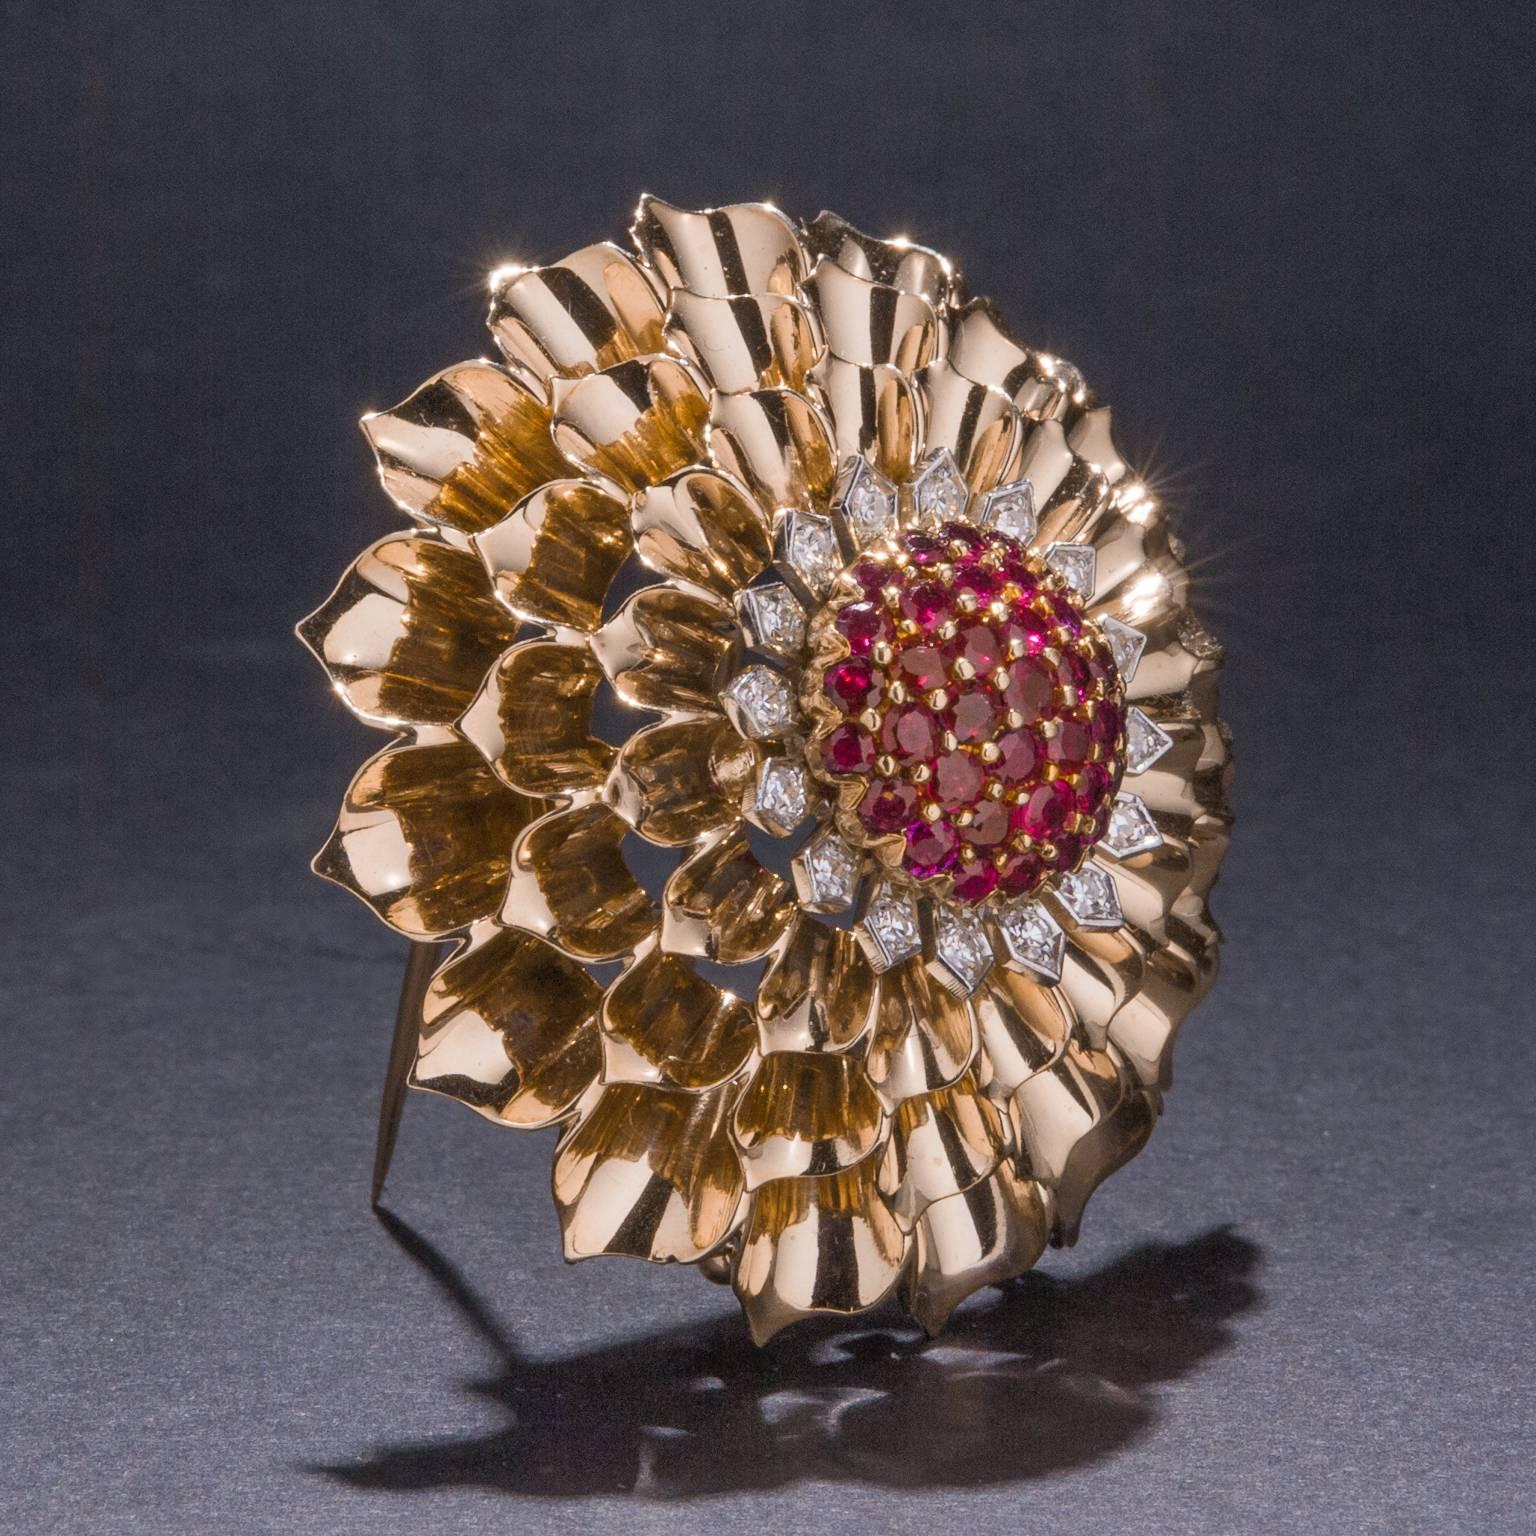 This stunning vintage Tiffany & Co. brooch features 37 rubies for a total weight of 1.40 carats and 16 diamonds weighing a total of .48 carats. This brooch takes the form of a flower with the petals are crafted in gleaming yellow gold. The piece